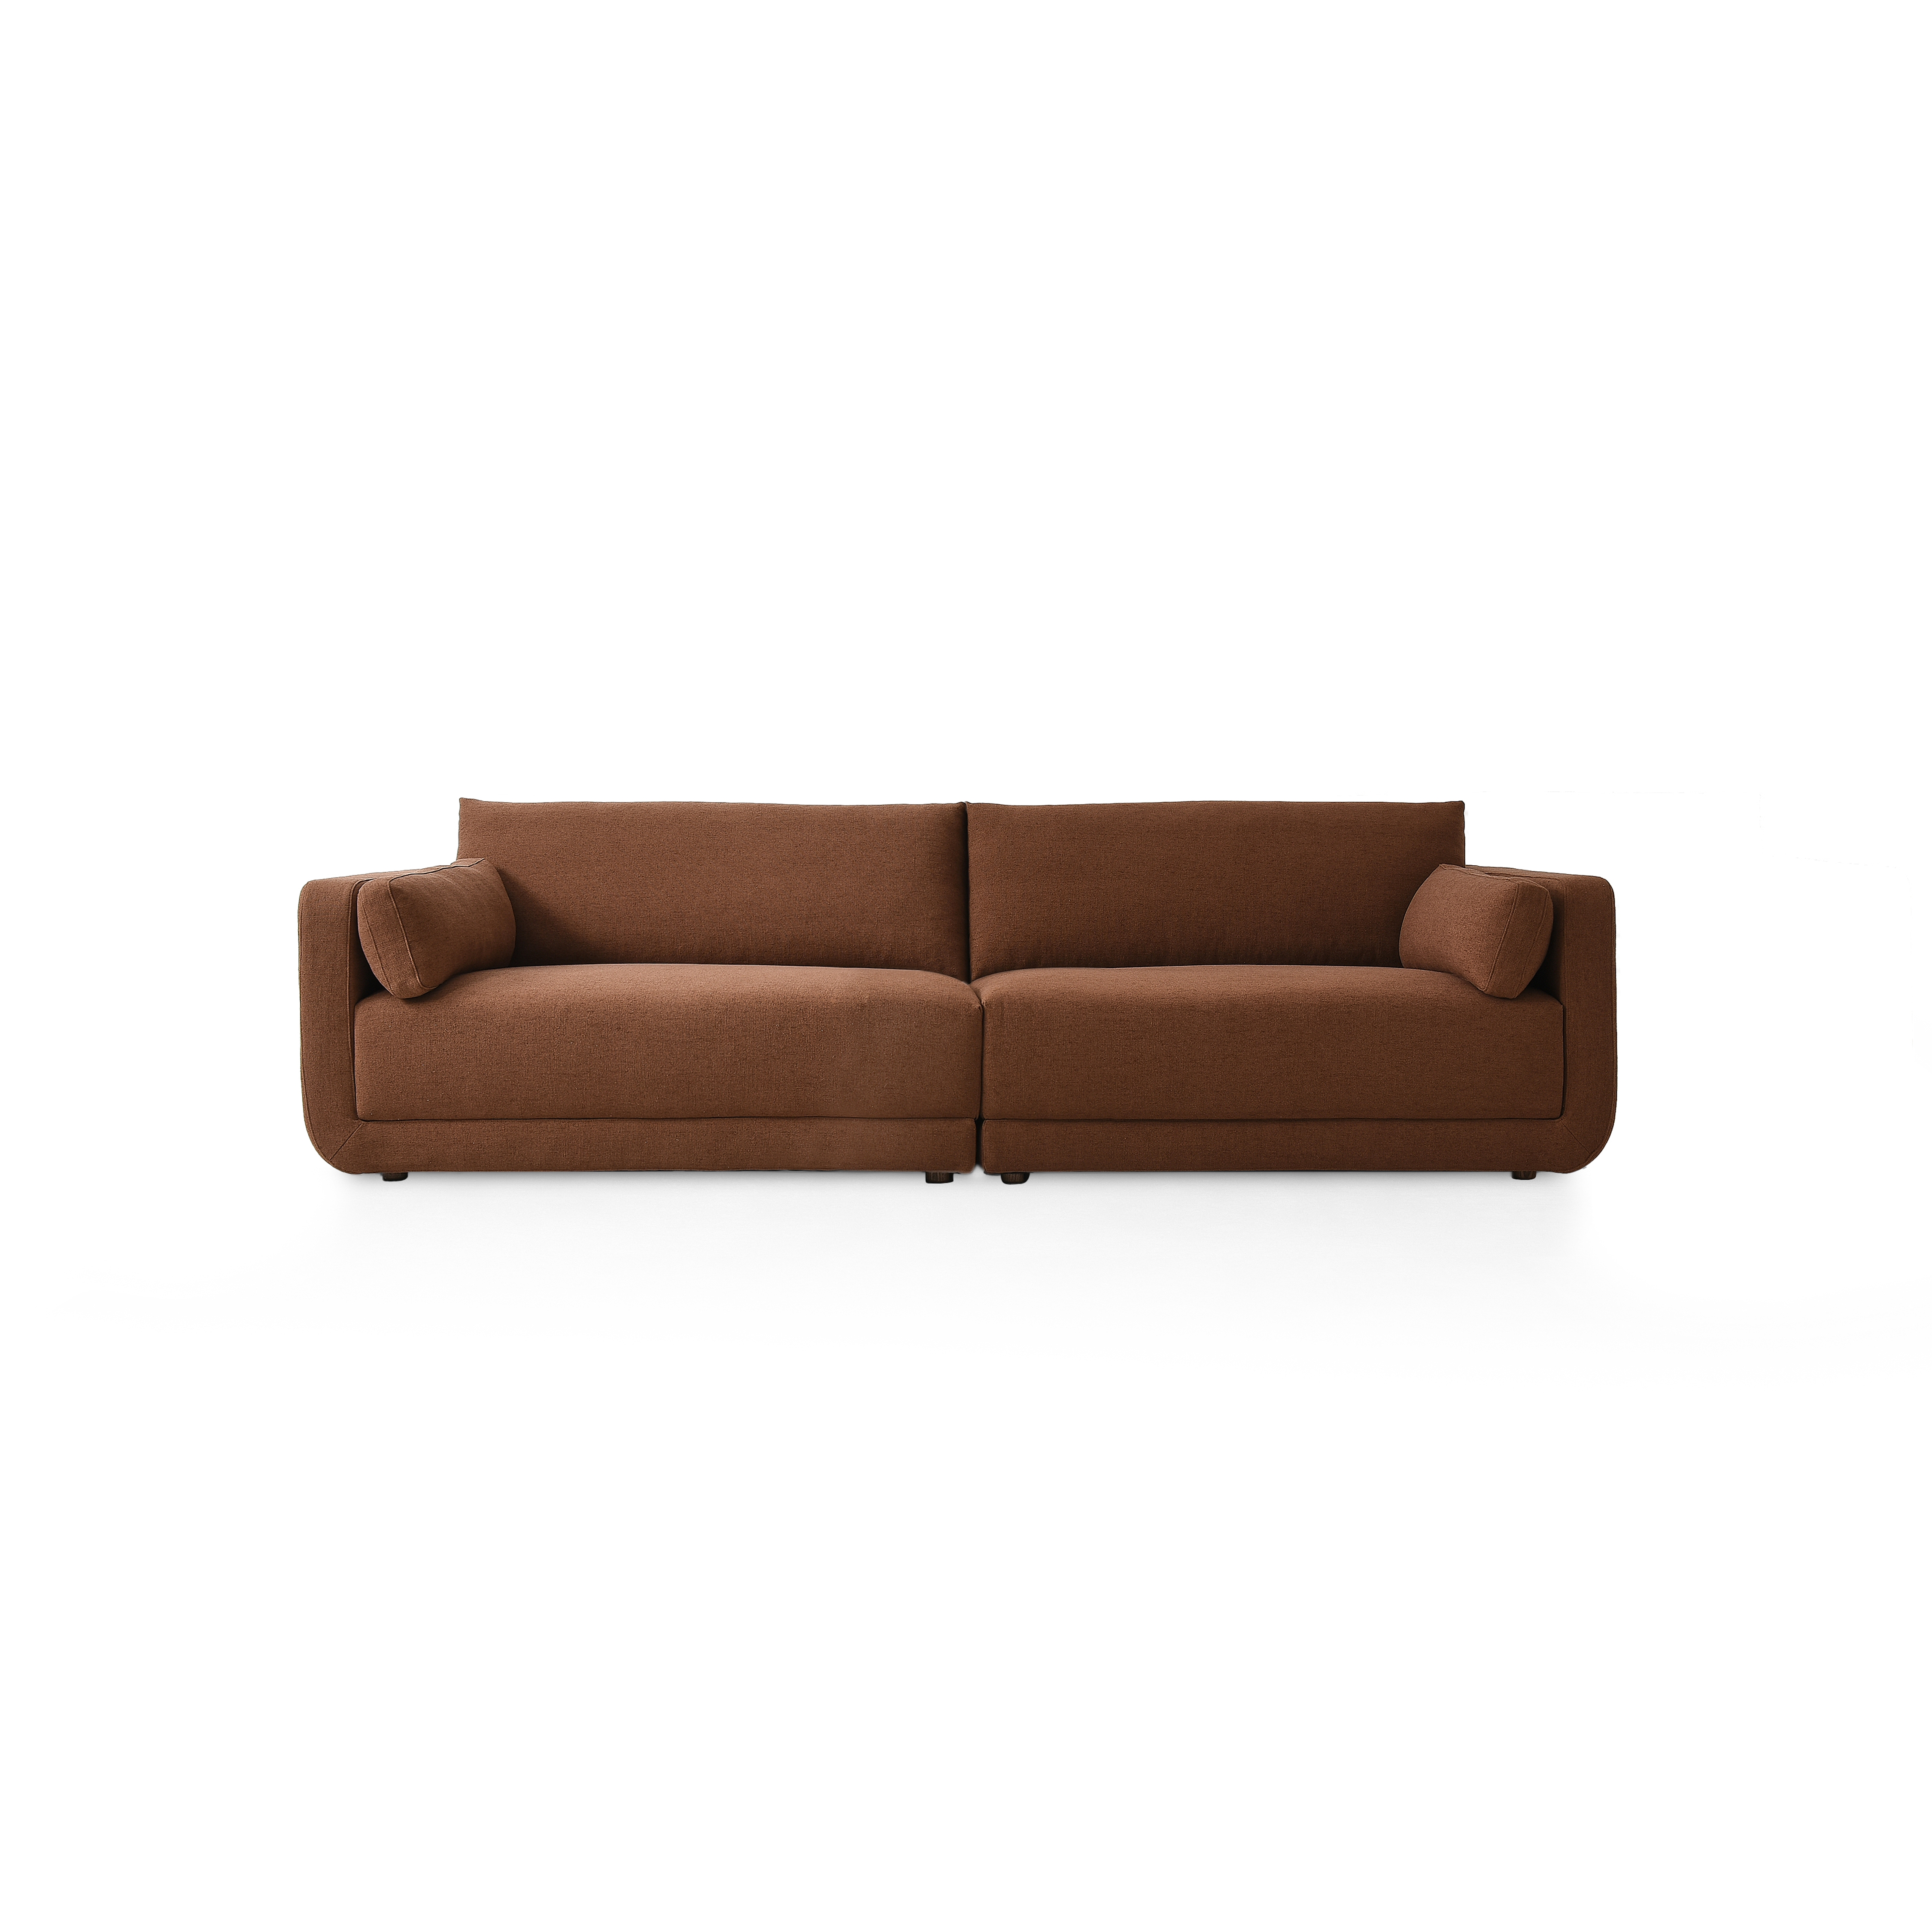 Toland 2pc Sectional-105"-Bartin Rust - Image 2